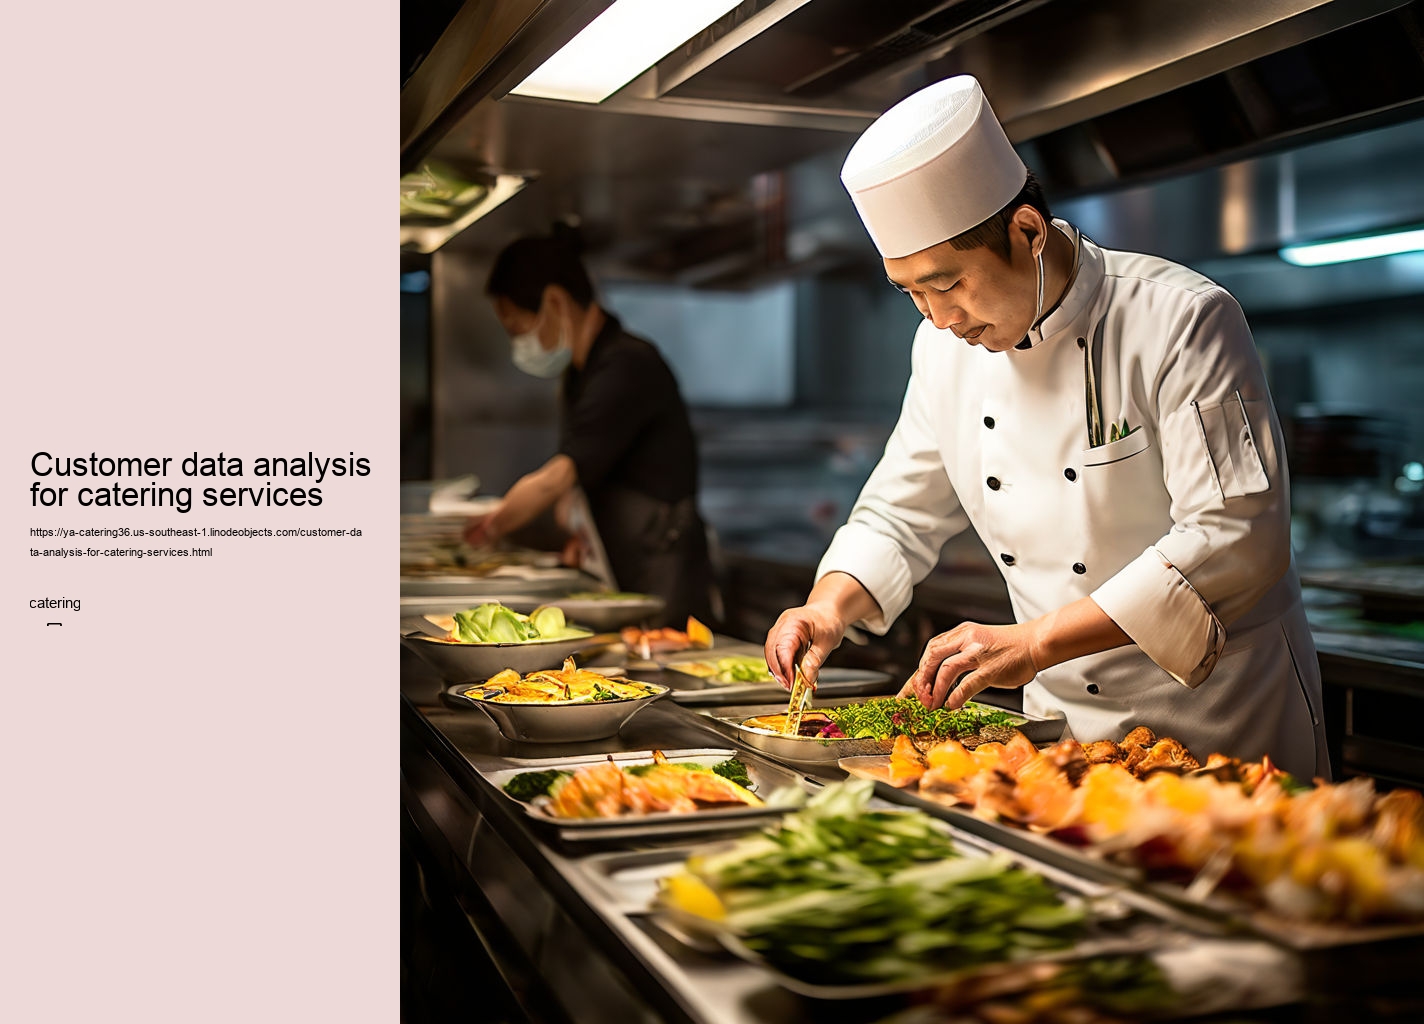 Customer data analysis for catering services